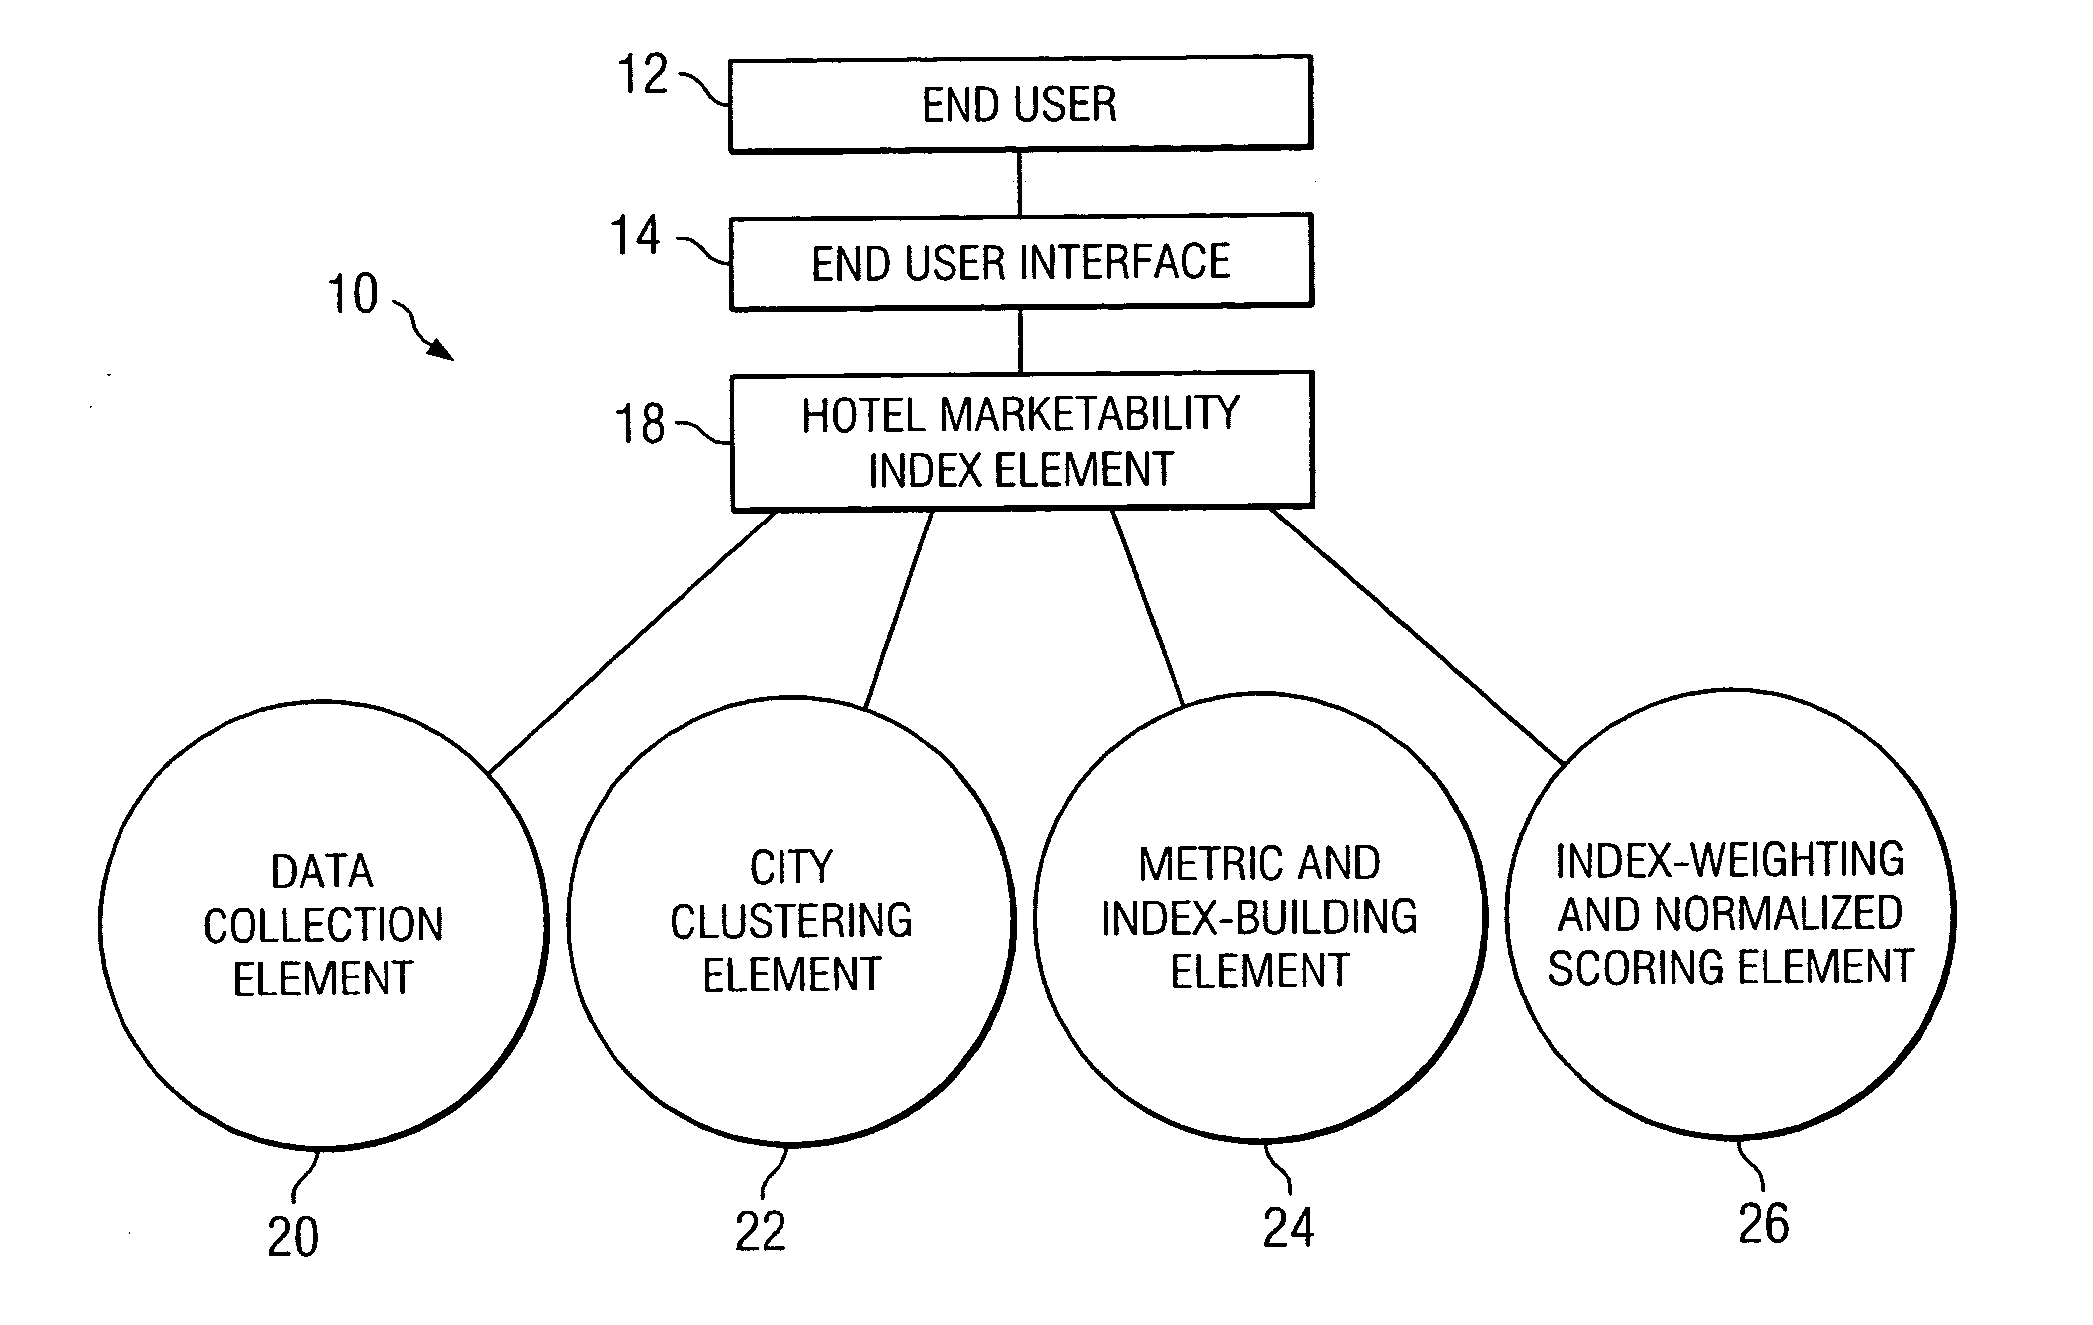 System and method for indexing travel accommodations in a network environment